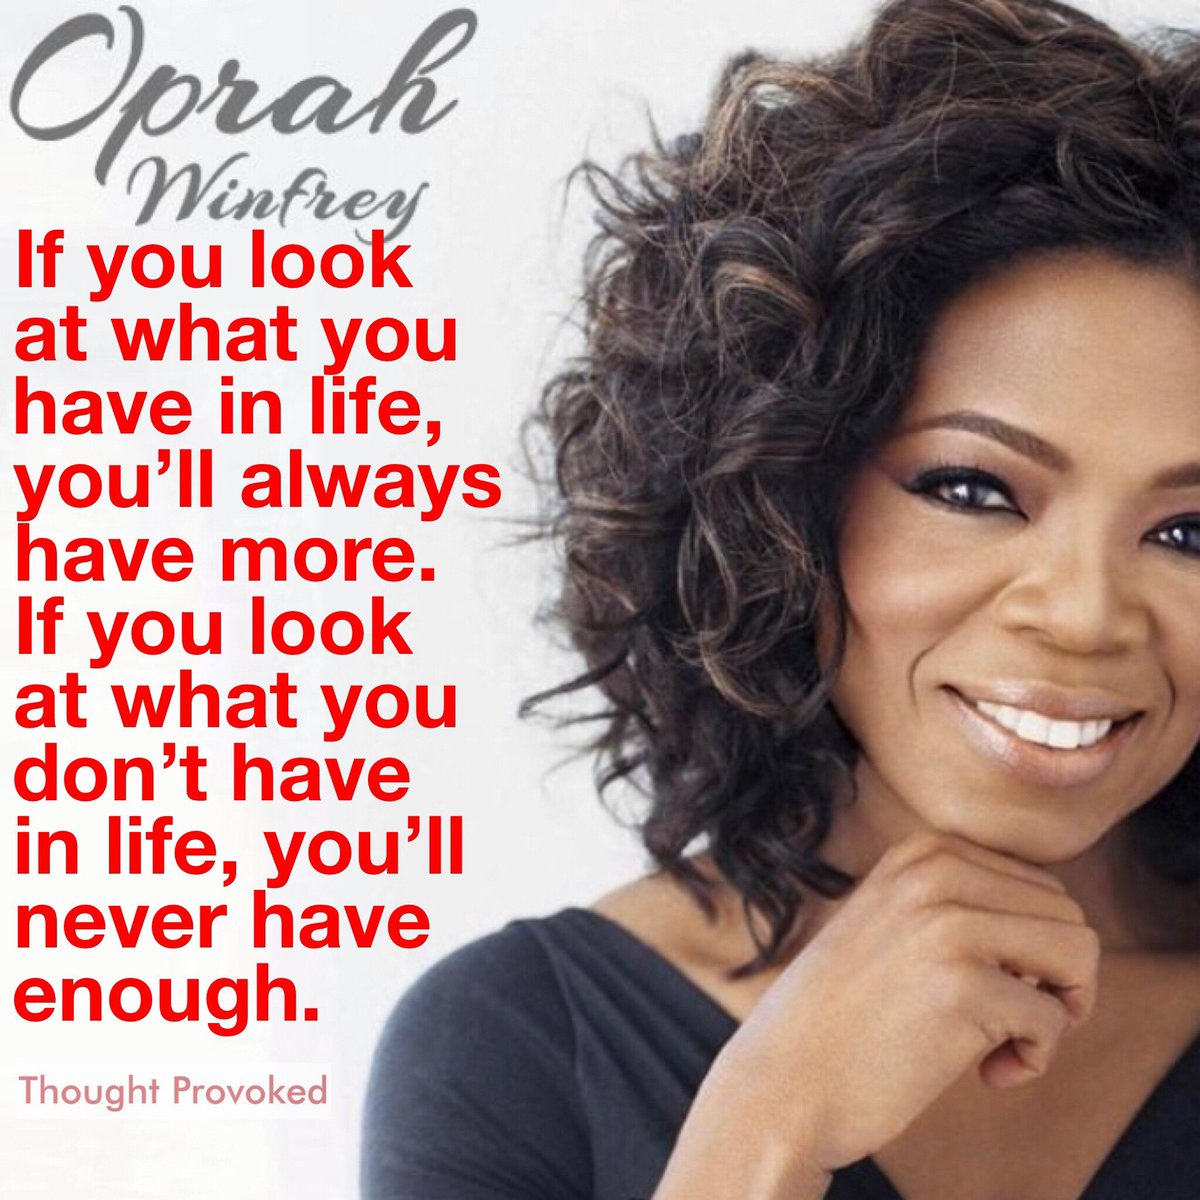 If you look at what you have in life, you'll always have more. If you look at what you don't have in life, you'll never have enough. #quote #IQRTG